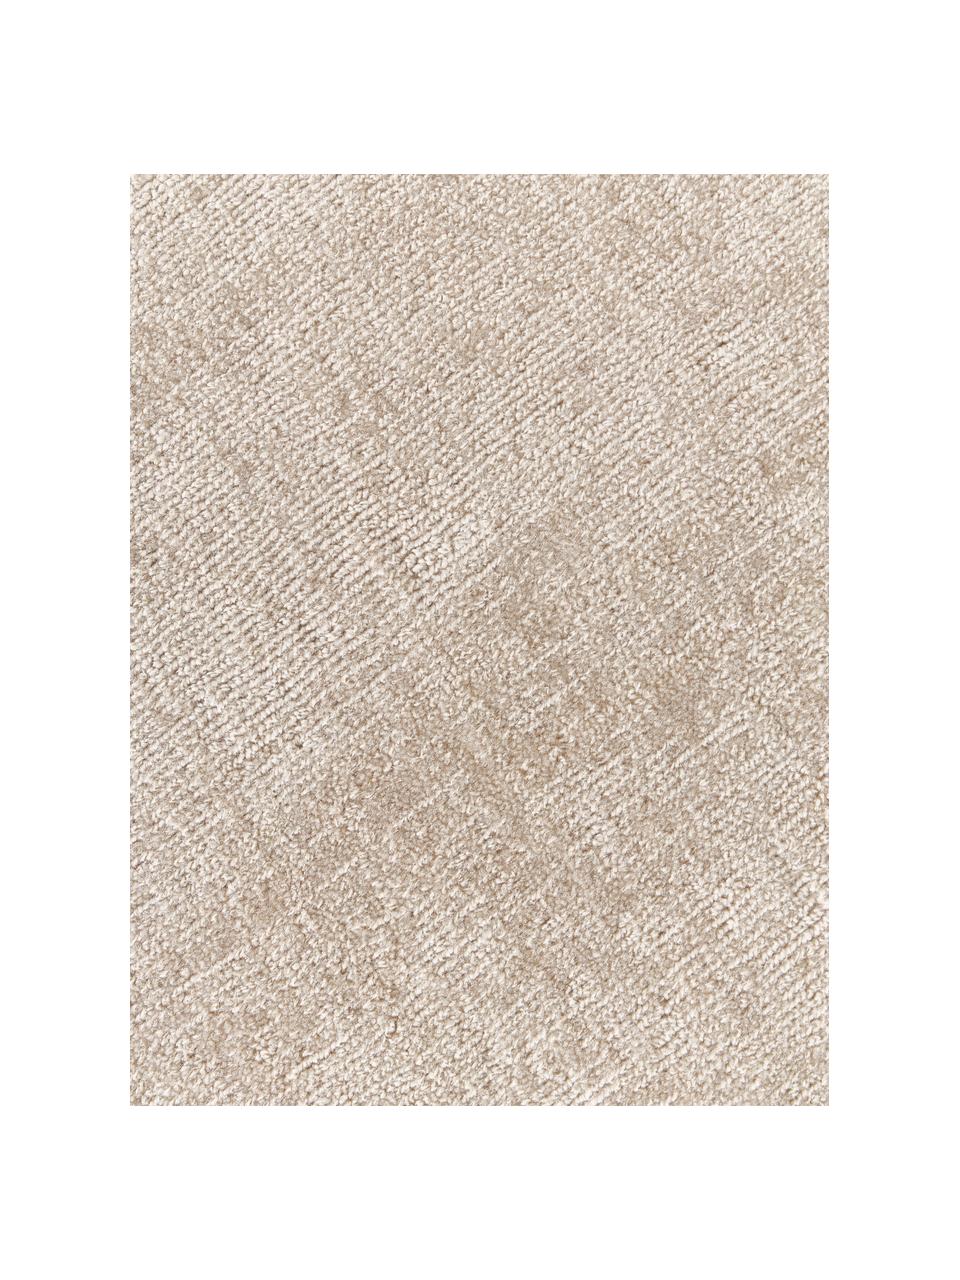 Tappeto luccicante Kari, 100% poliestere certificato GRS (Global Recycle Standard), Beige, Larg. 80 x Lung. 150 cm (taglia XS)